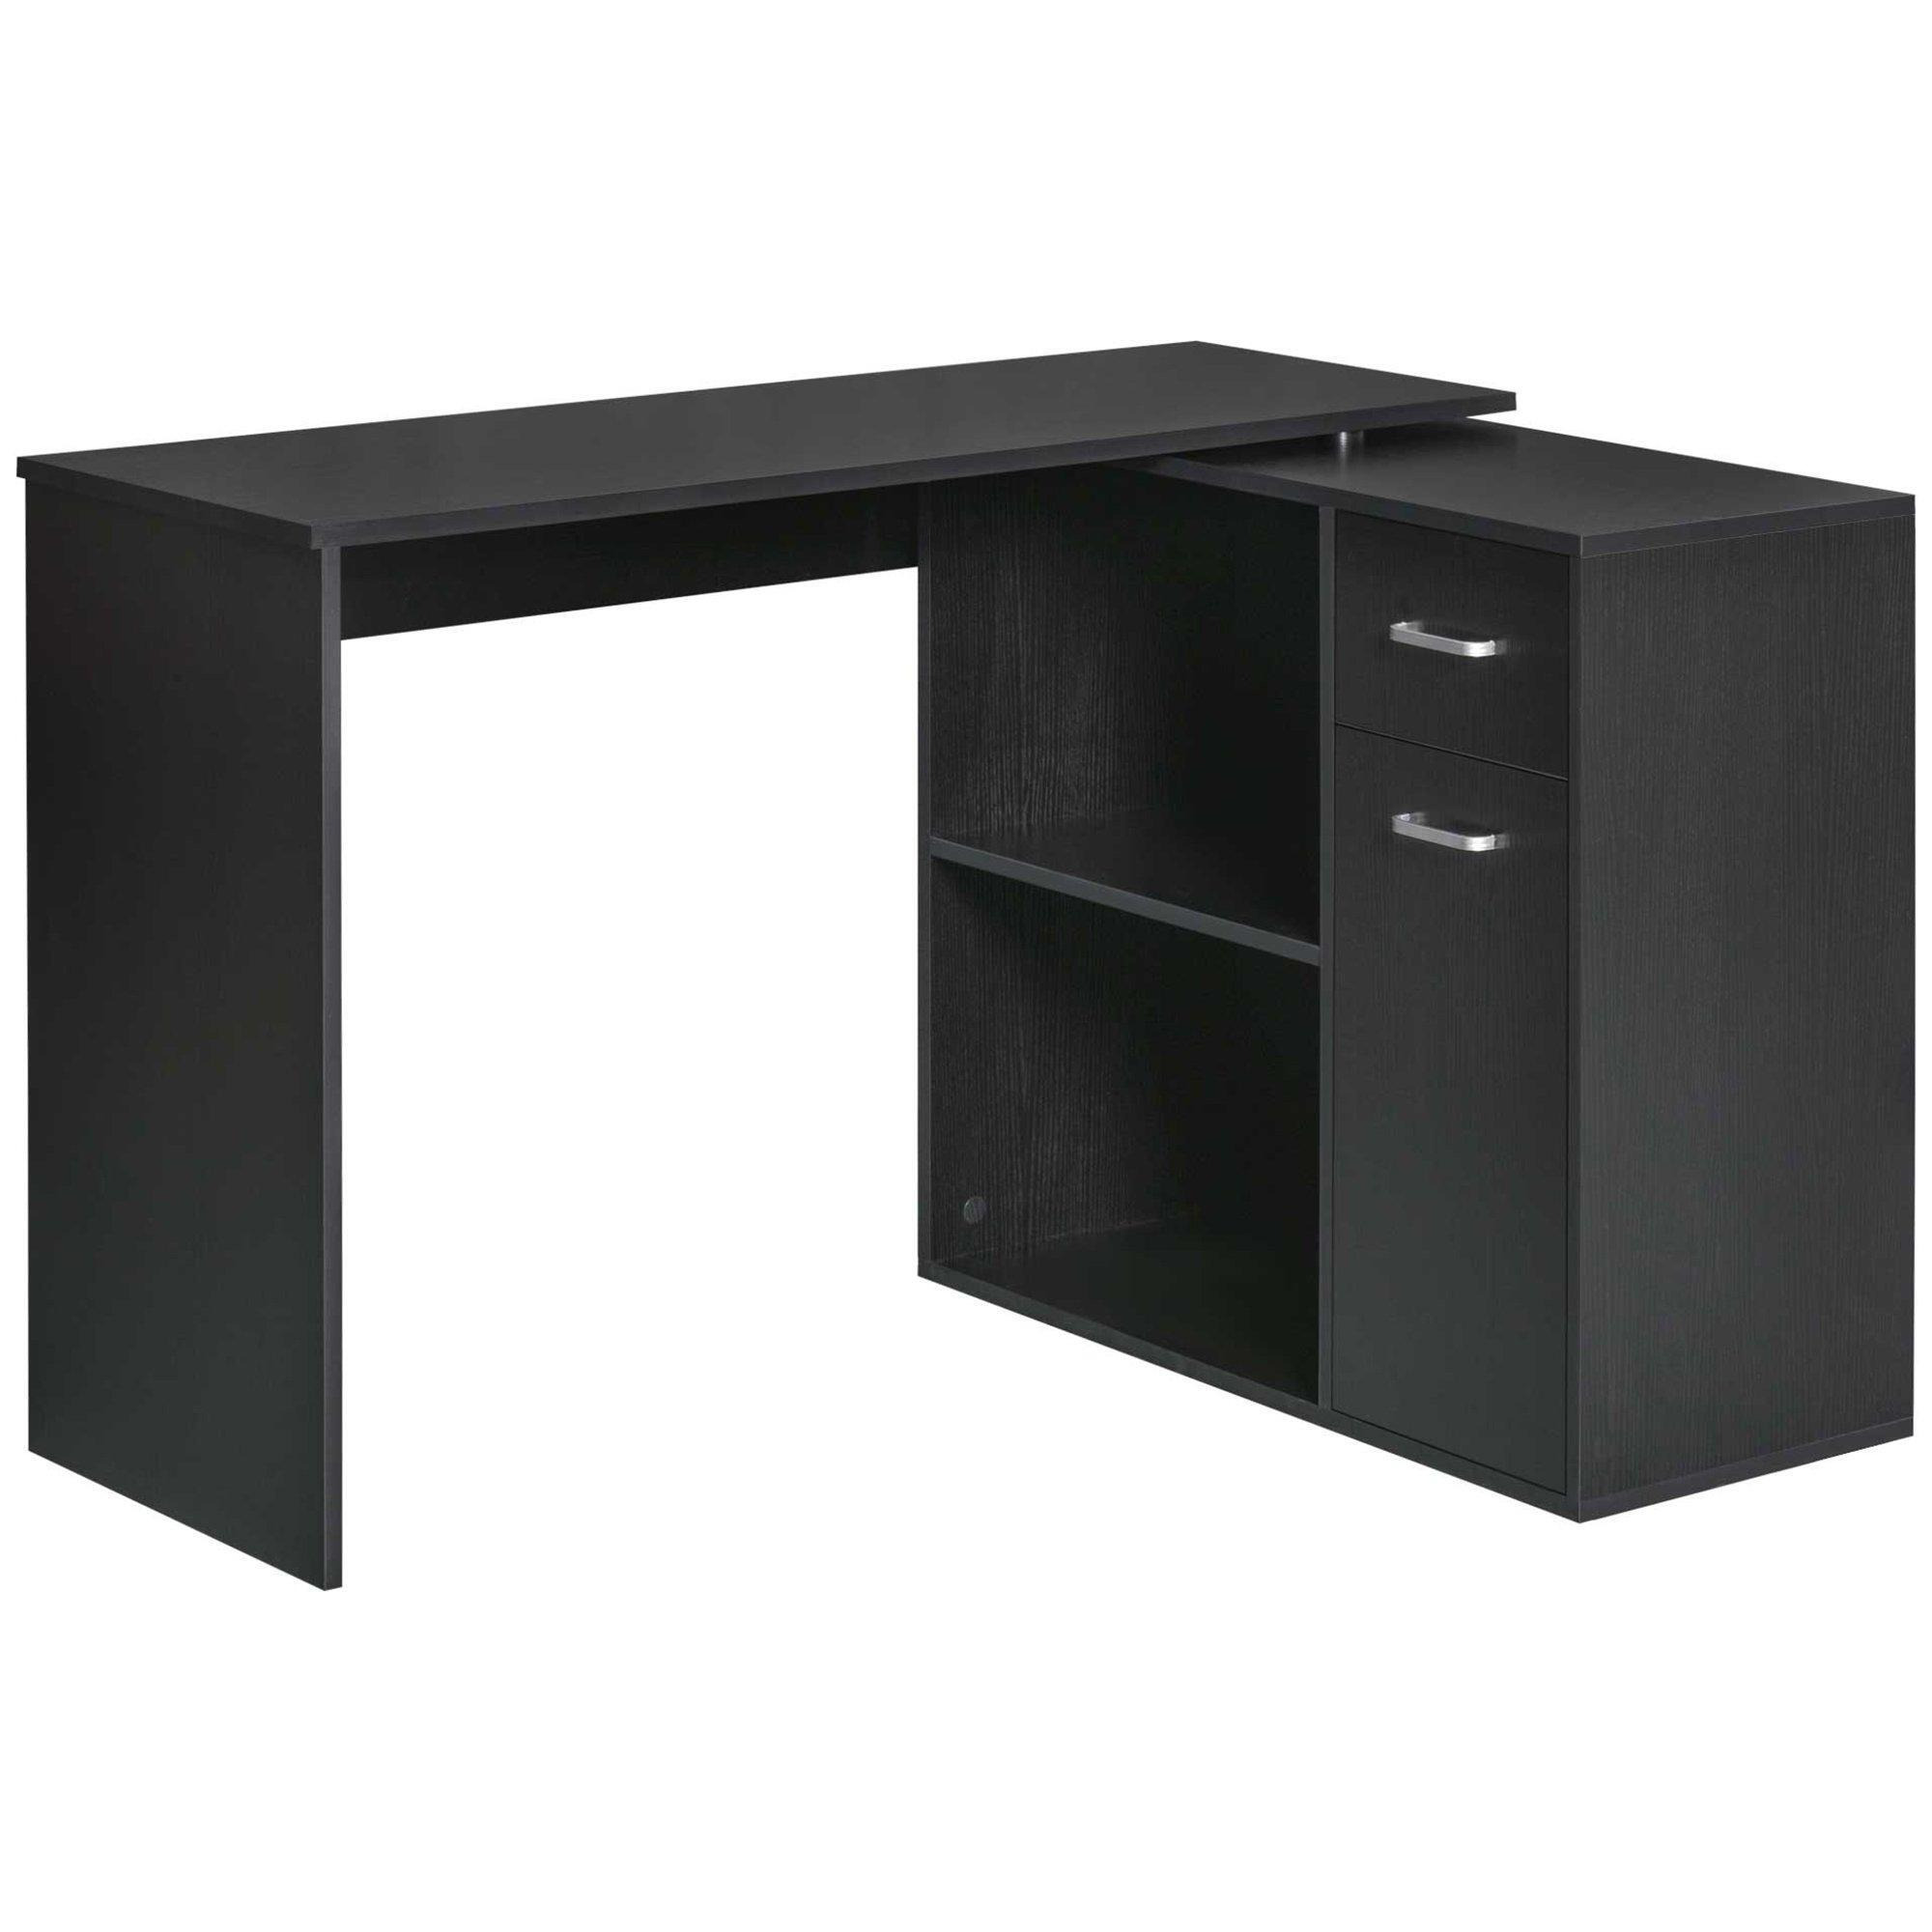 L-Shaped Computer Desk Dining Table with Storage Shelf and Drawer - image 1